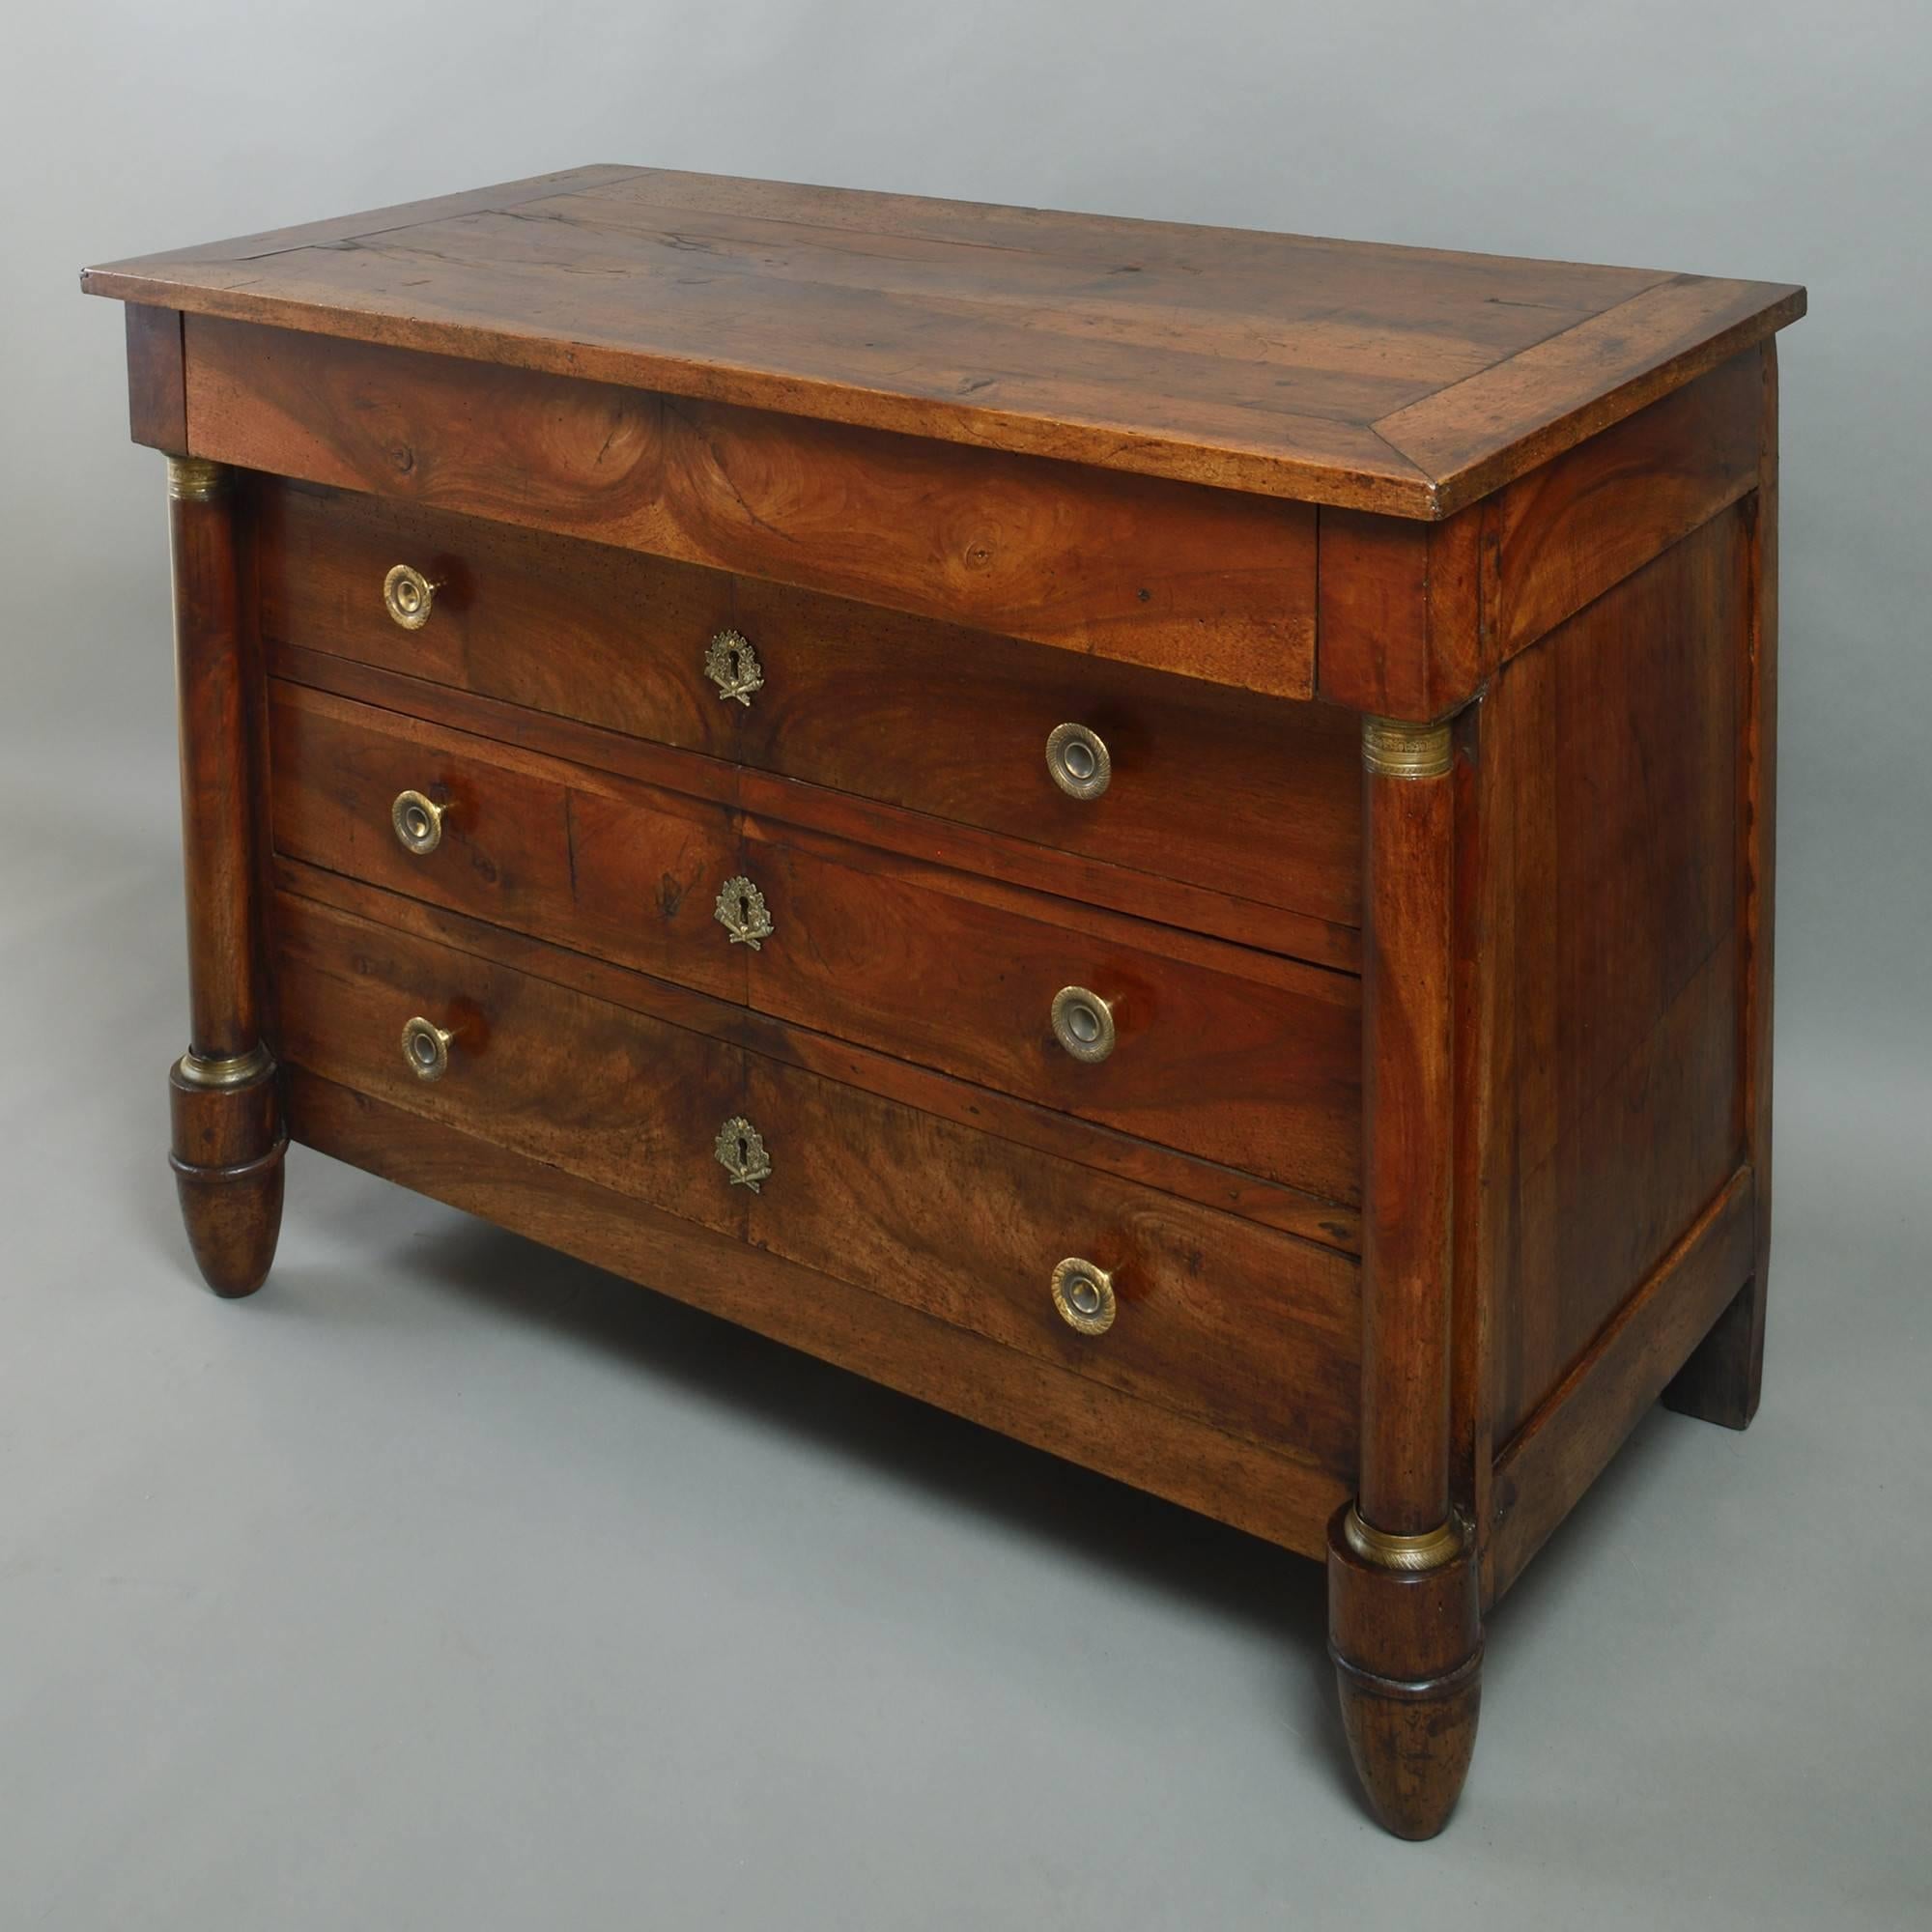 An early 19th century Empire Period walnut commode, the cleated top above a hidden frieze drawer and three long drawers with book-matched veneers and finely chased handles and lock escutcheons, between two turned column supports, all standing upon